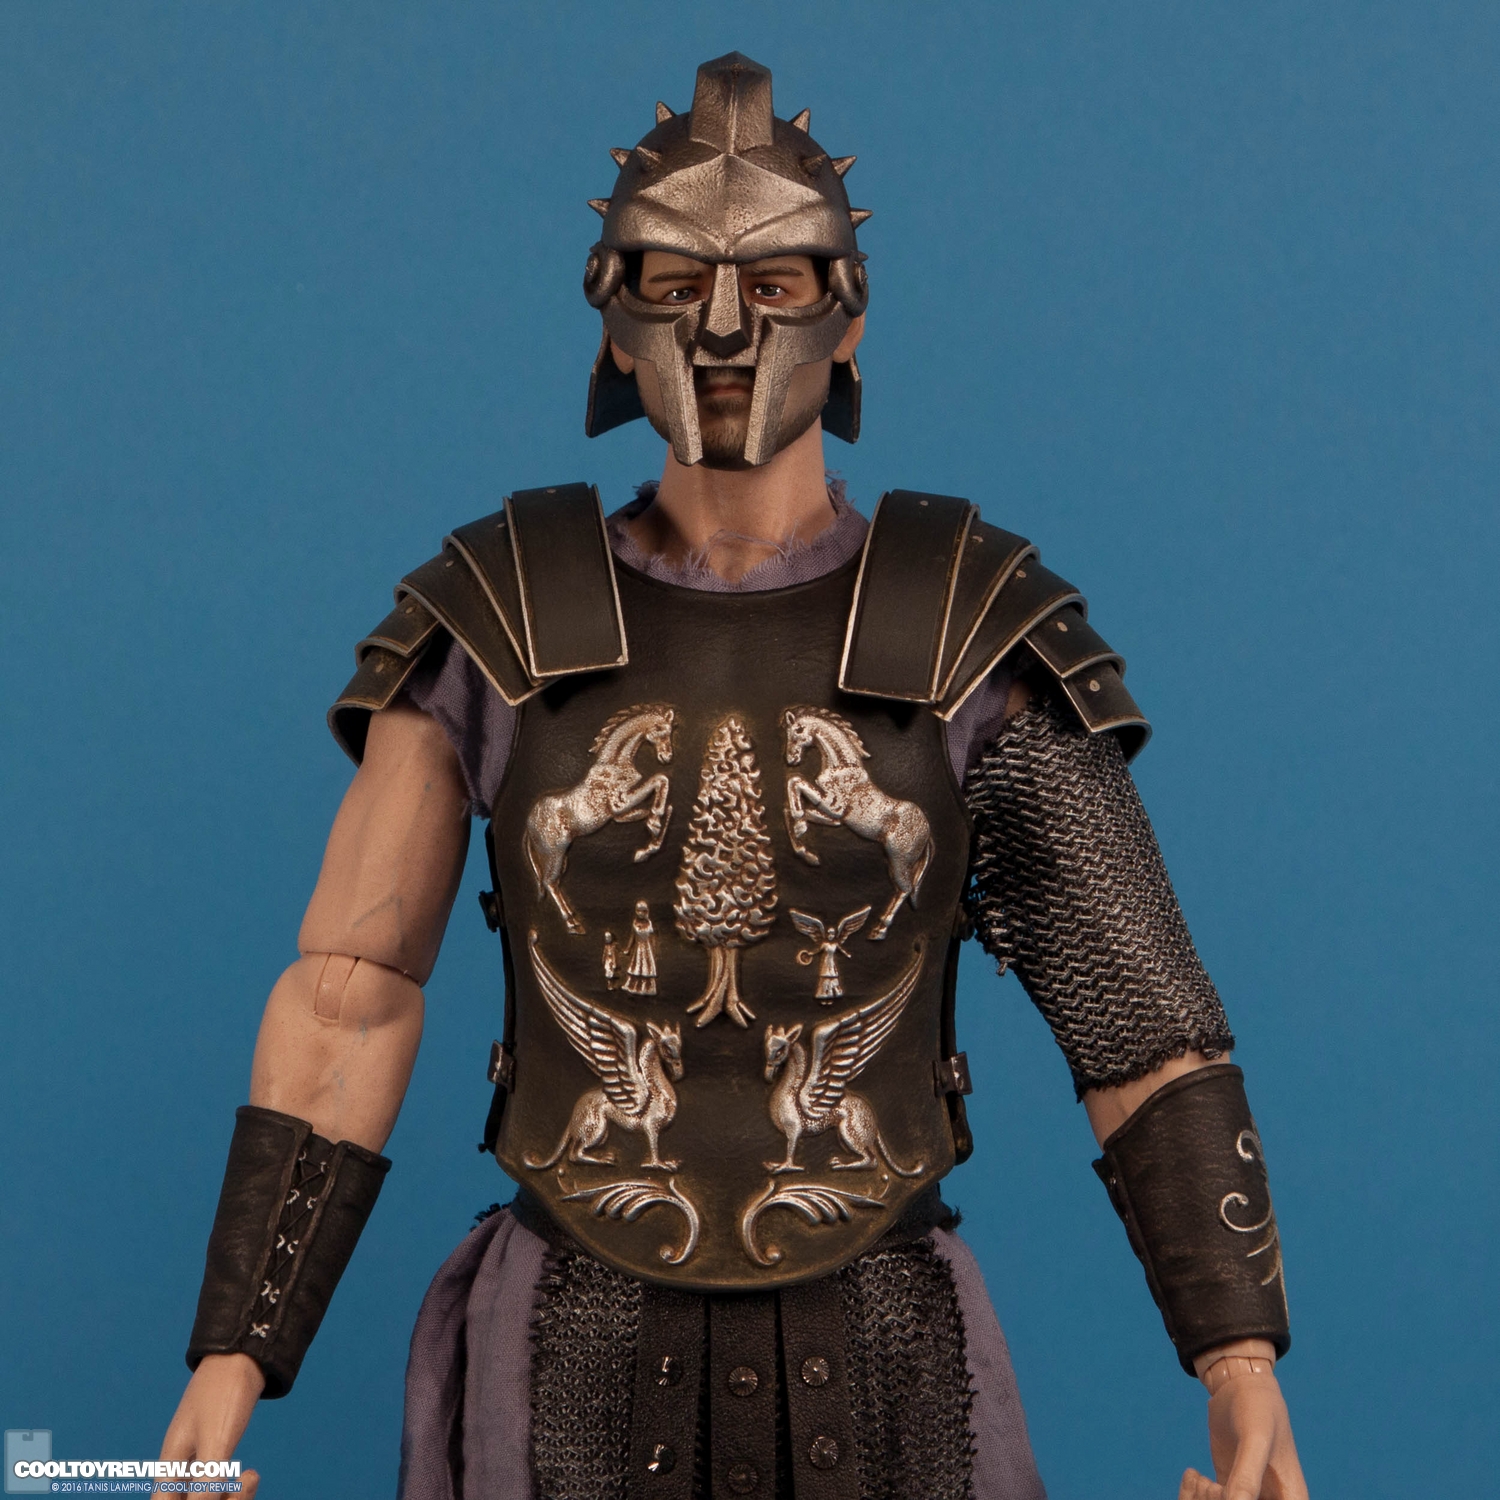 pangaea-toy-gladiator-general-sixth-scale-collectible-figure-013.jpg